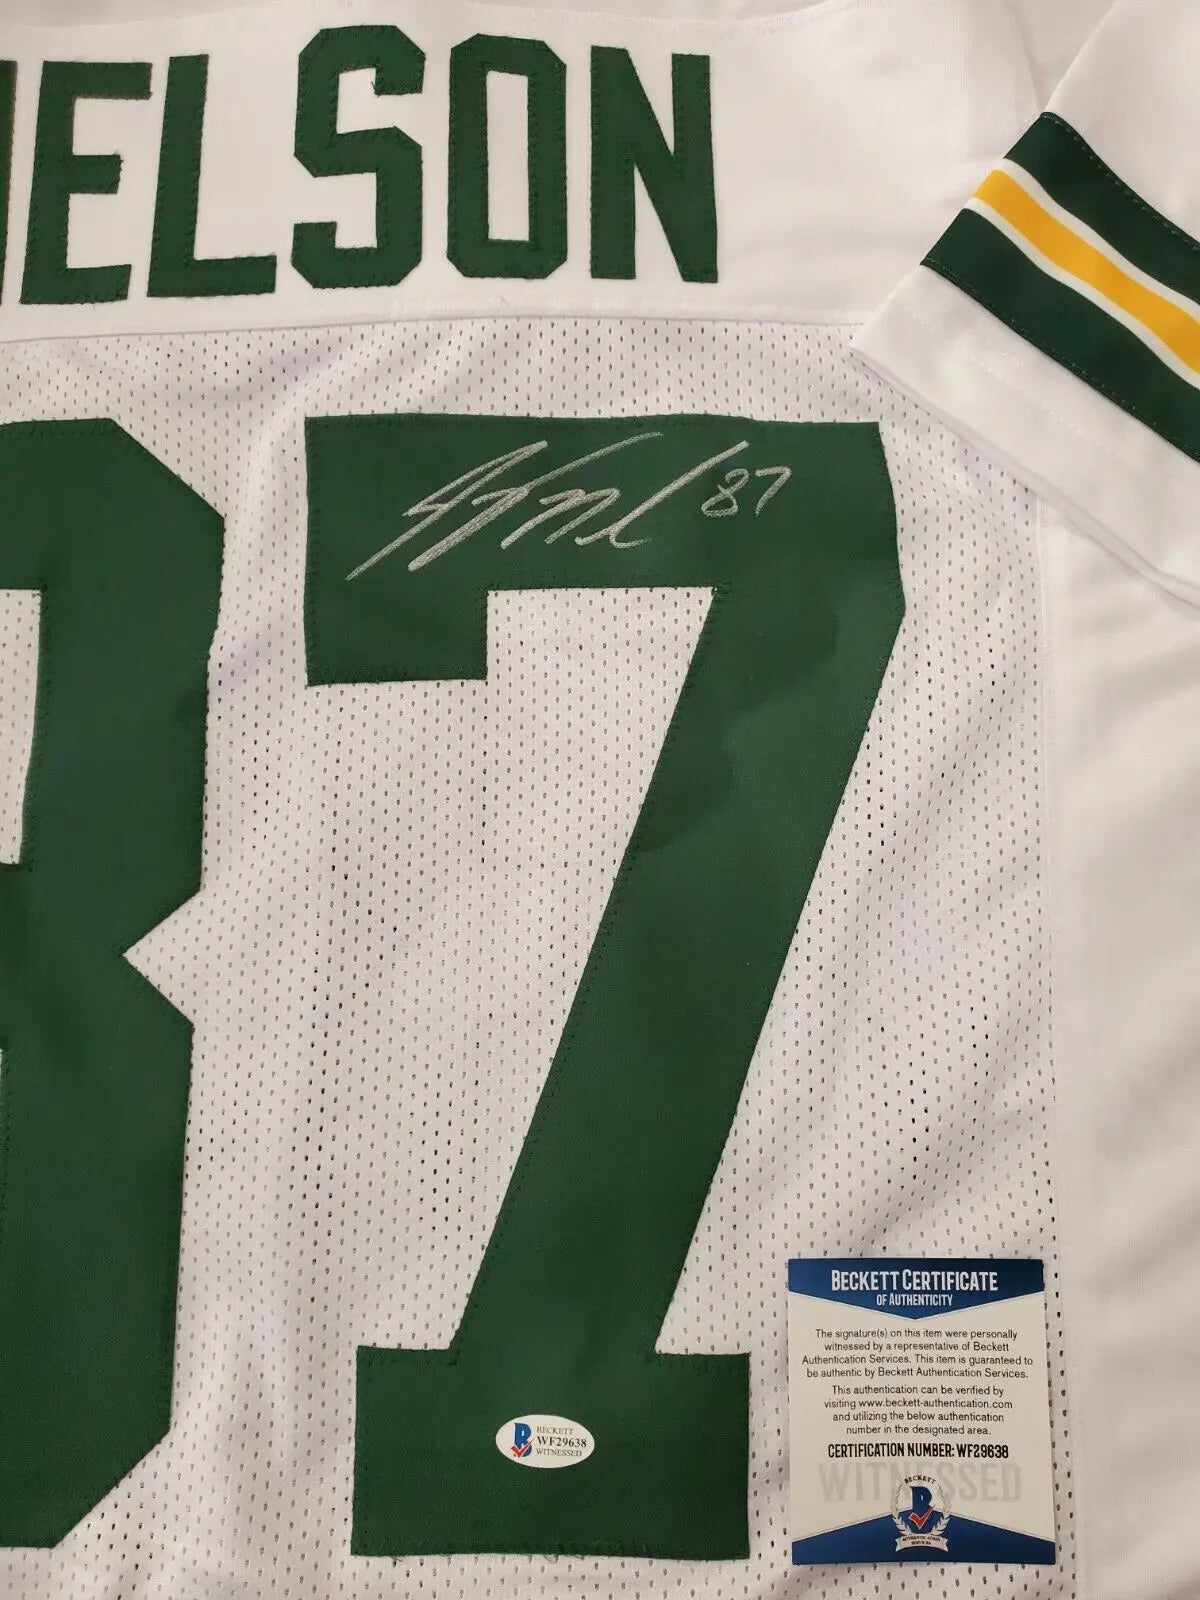 MVP Authentics Jordy Nelson Autographed Signed G.B. Packers Jersey Beckett Coa 152.10 sports jersey framing , jersey framing